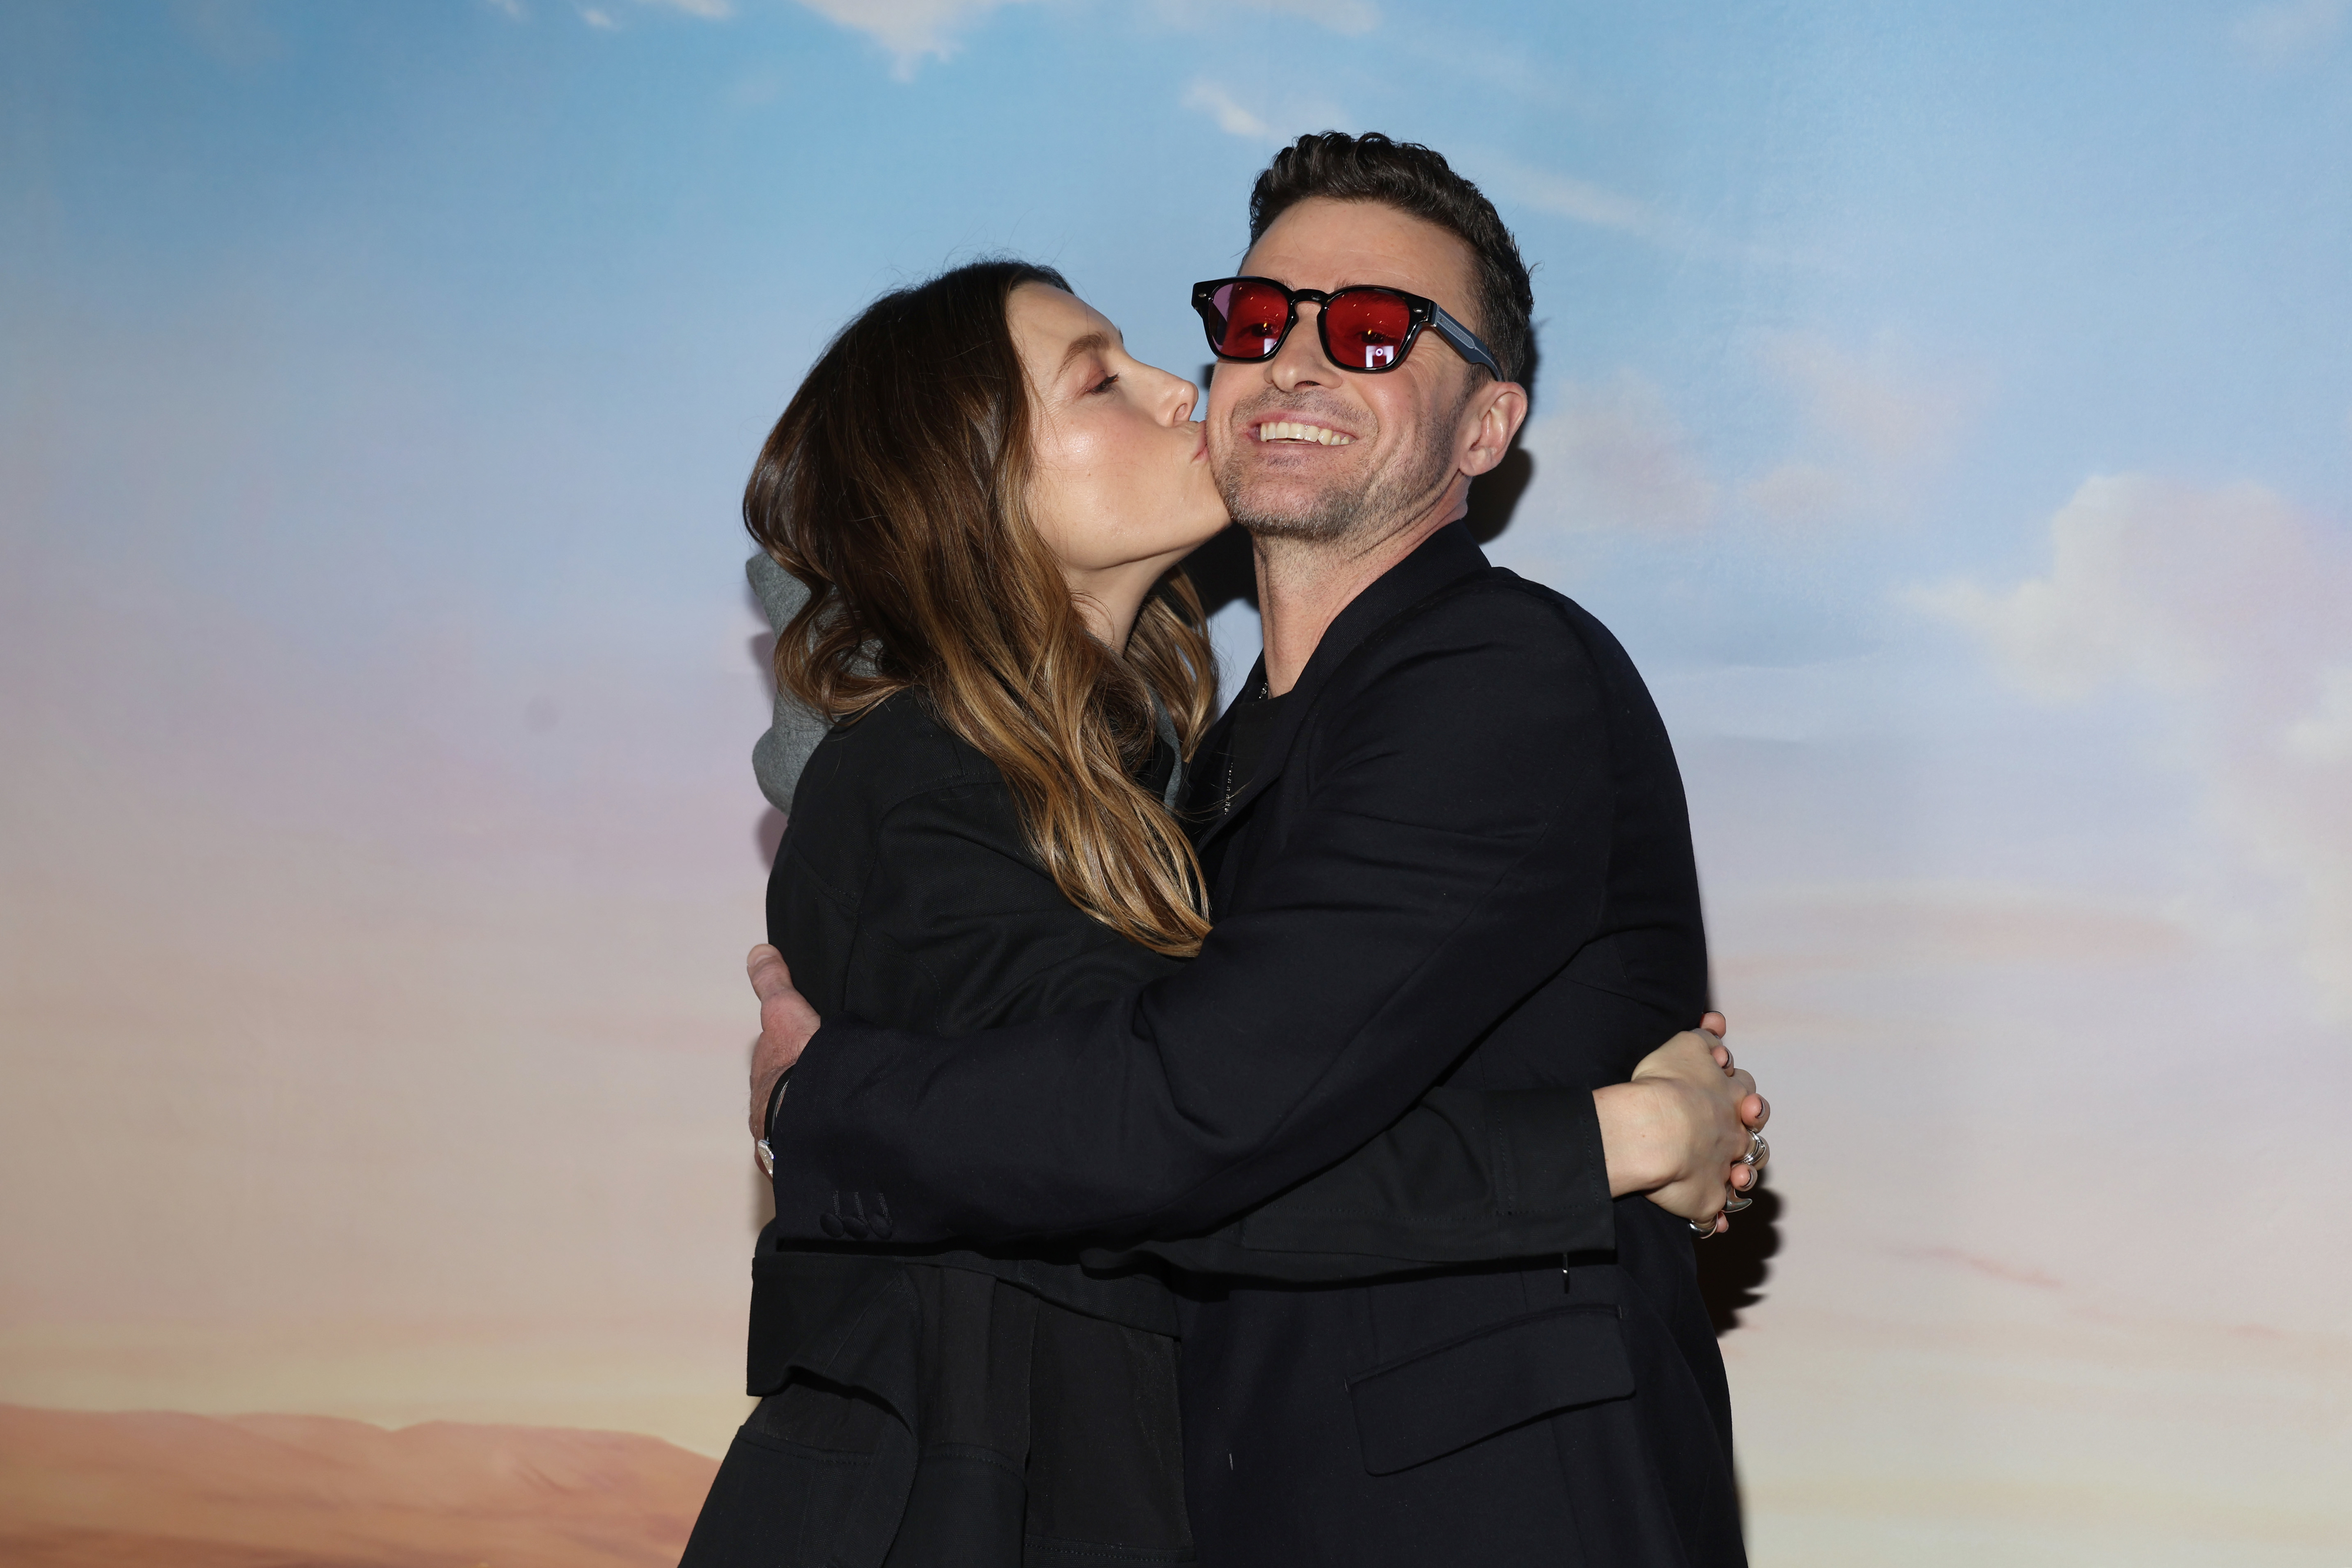 A woman wearing a black outfit kisses a smiling man&#x27;s cheek while they embrace. The man is wearing a black outfit and red sunglasses